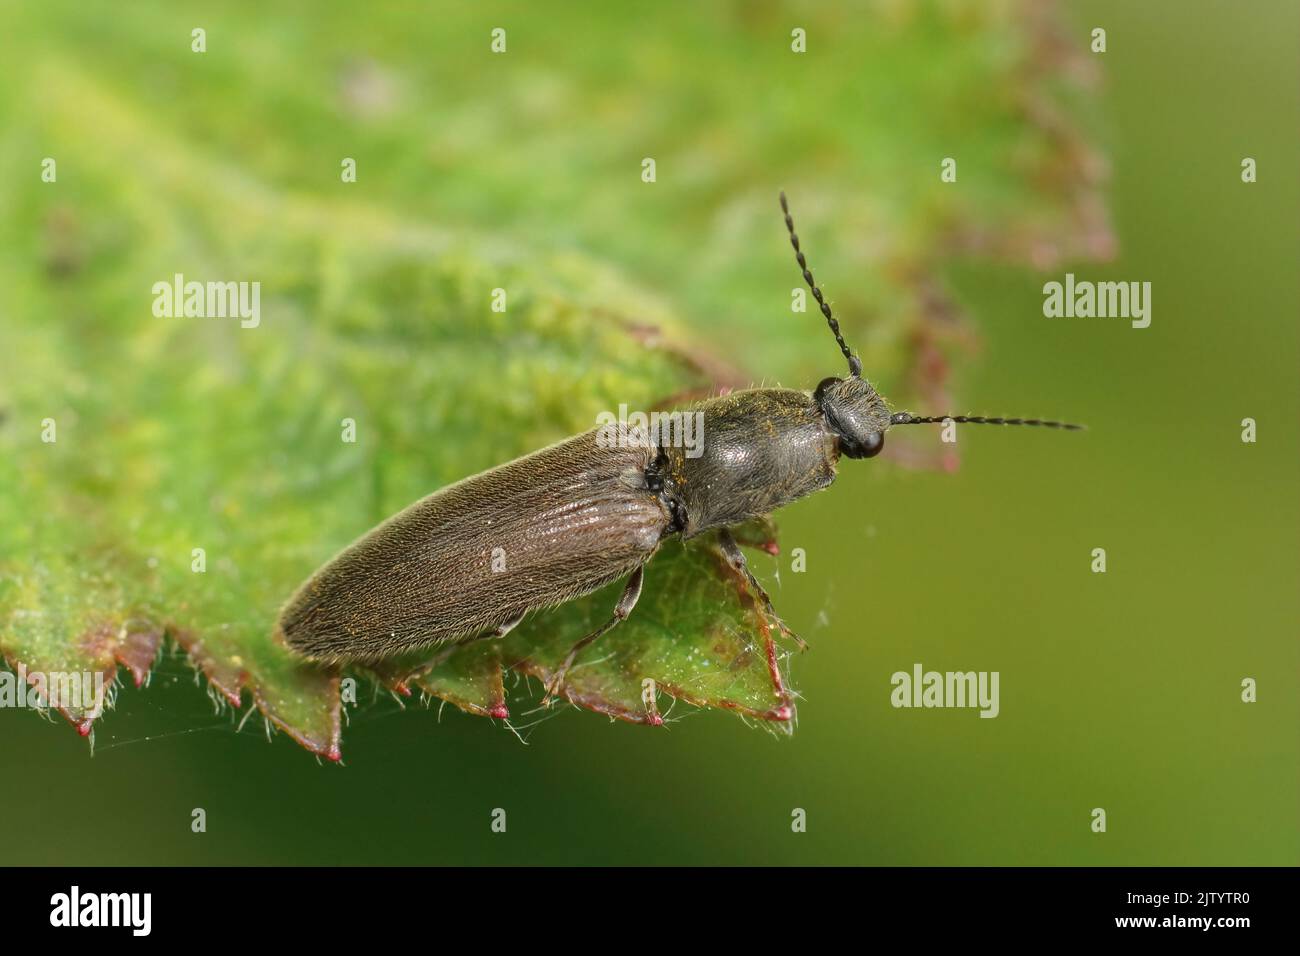 Natural closeup on a brown , hairy, cliking beetle Athous haemorrhoidalis sitting on a green leaf Stock Photo